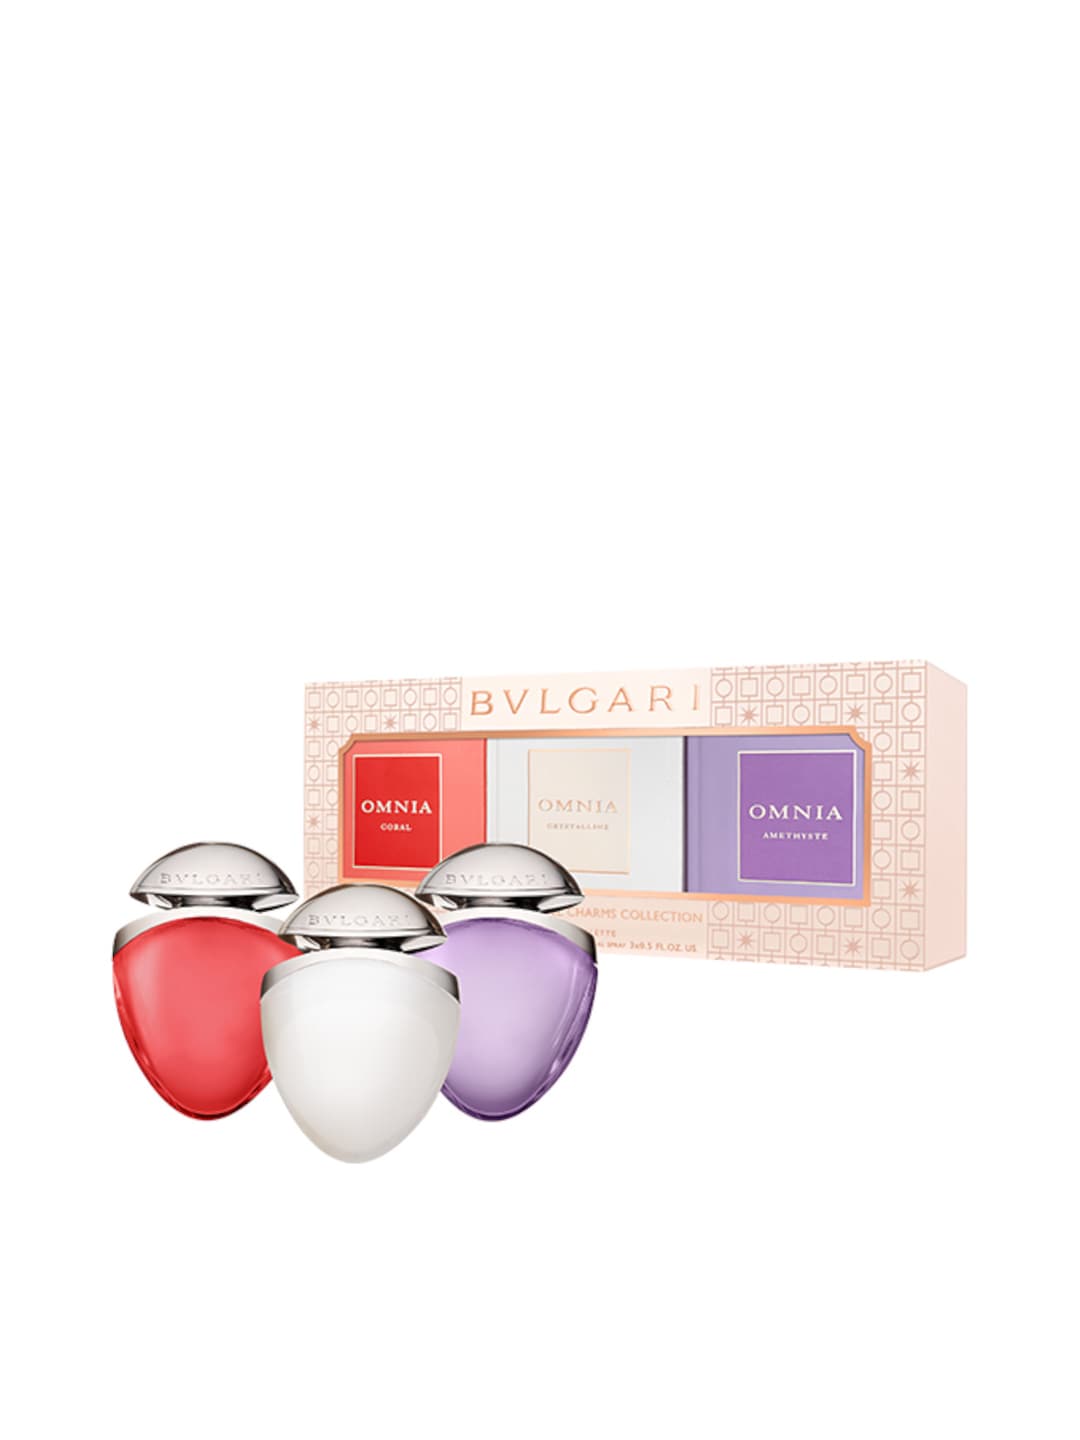 Bvlgari The Omnia Jewel Charms Collection Fragrance Gift Set 15 ml each Price in India